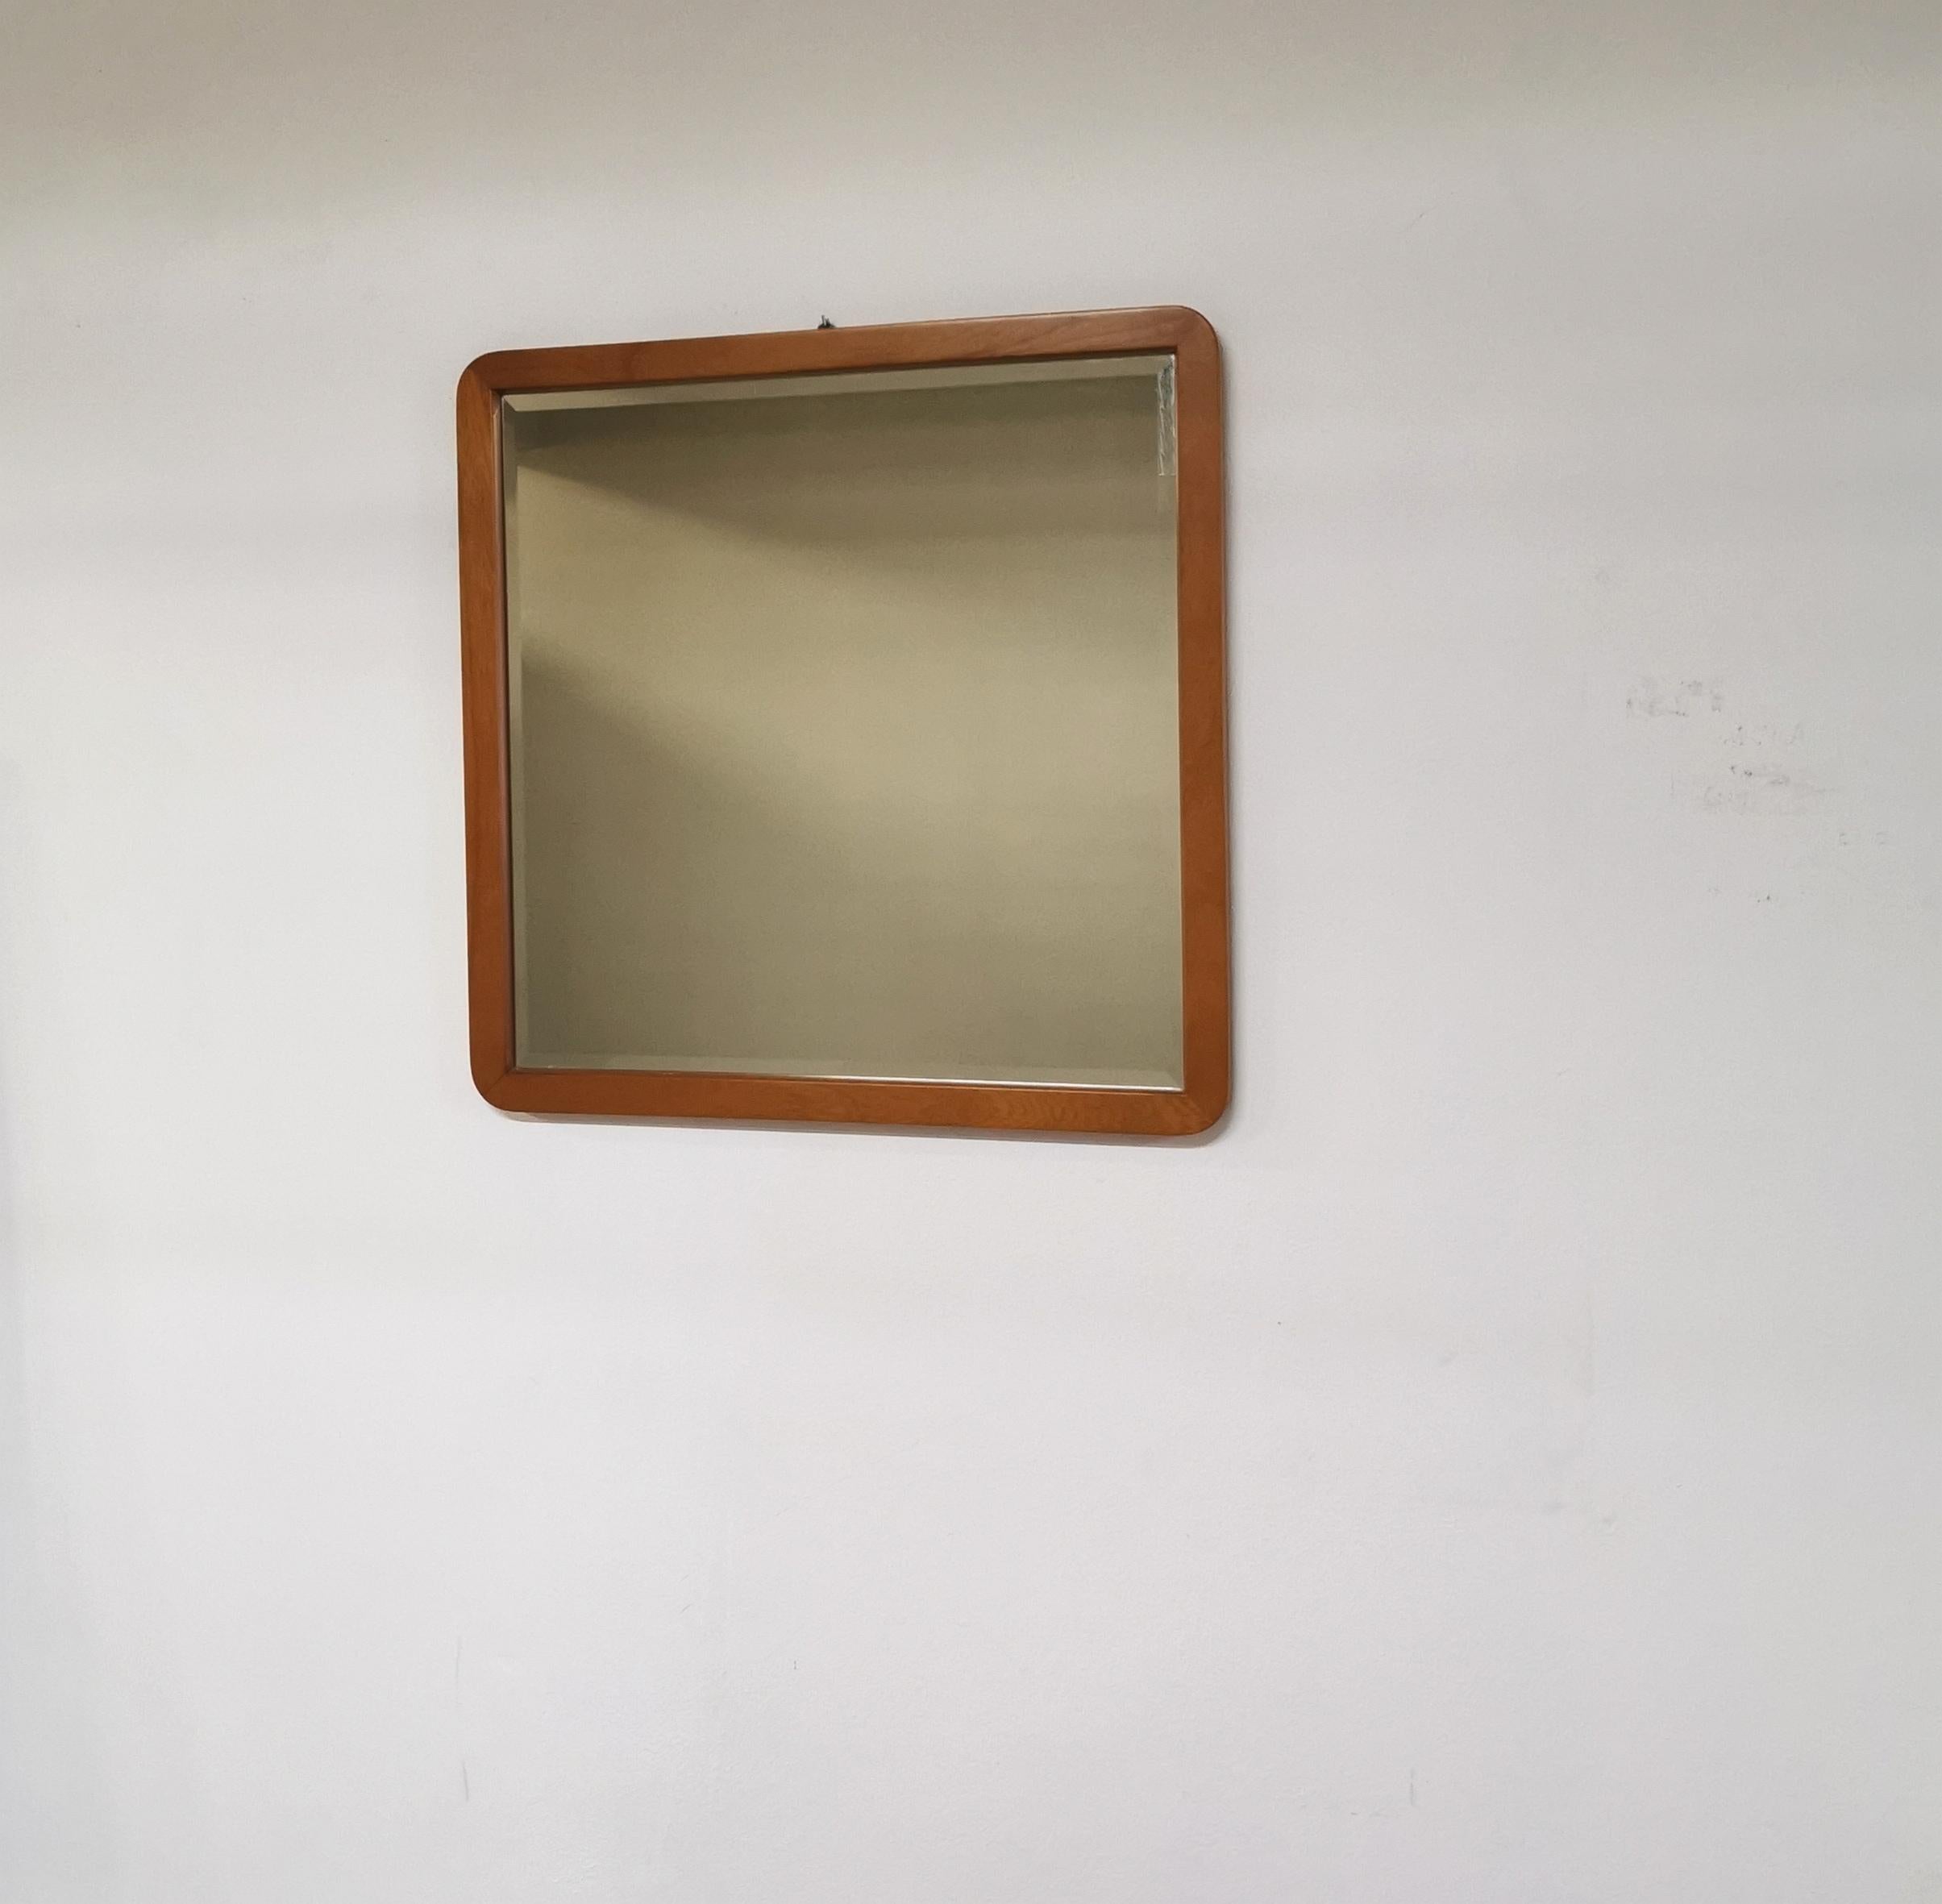 Wall Mirror Cherry Wood Frosted Glass Calligaris Square Modern Italy 1990s For Sale 1